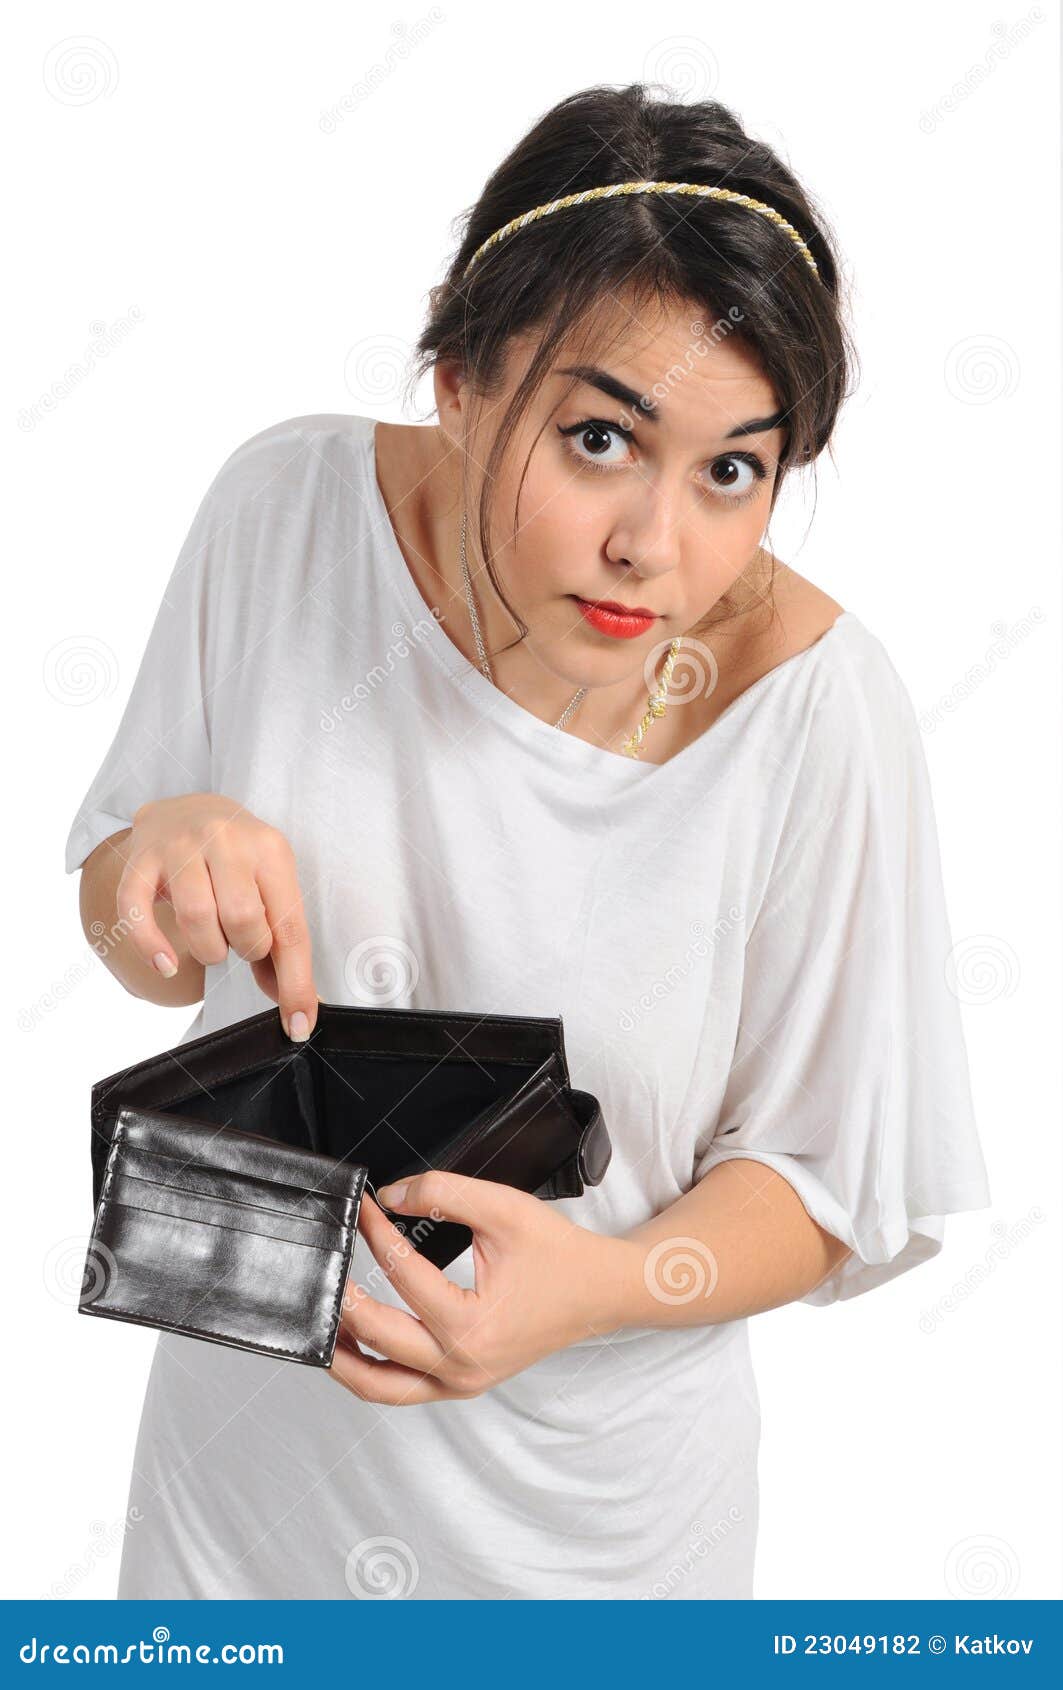 1,300+ Man Holding An Empty Purse Stock Photos, Pictures & Royalty-Free  Images - iStock